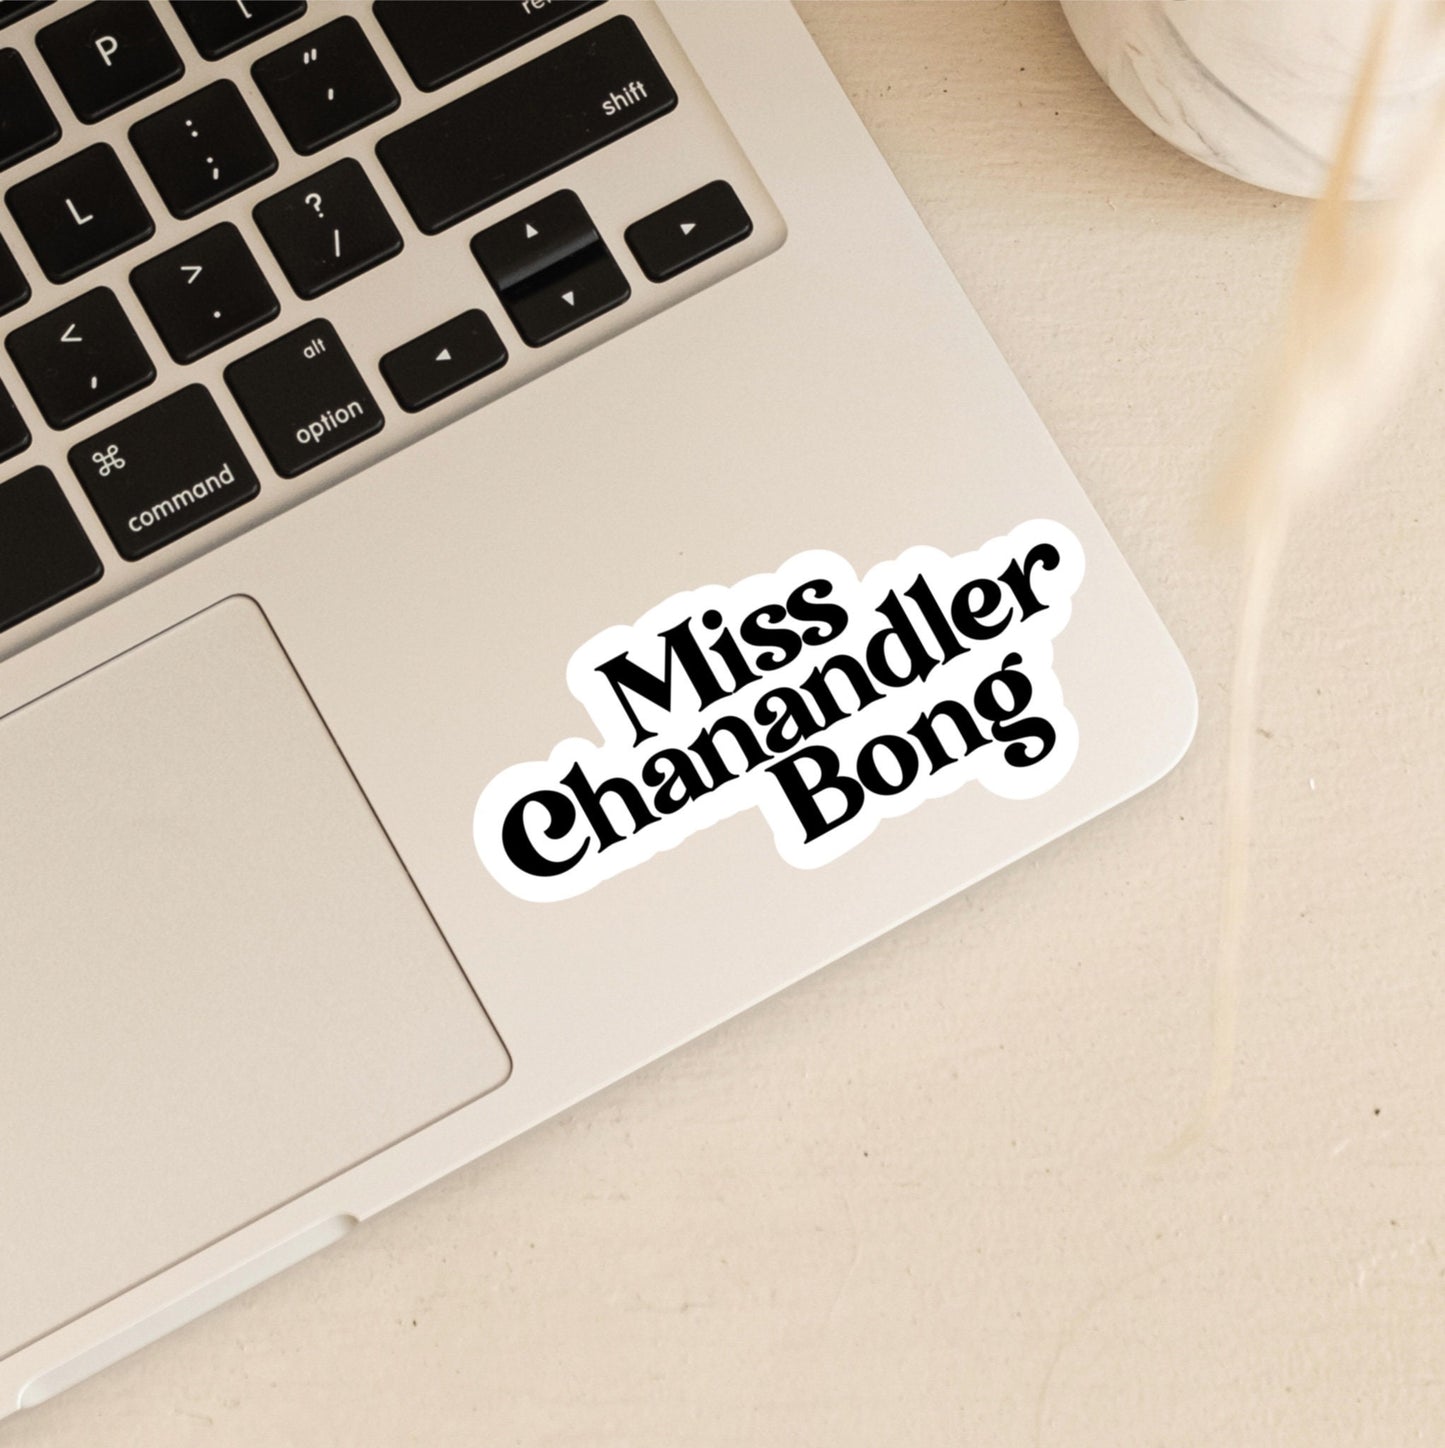 Miss Chanandler Bong | The One With the Friends Stickers | Friends Stickers